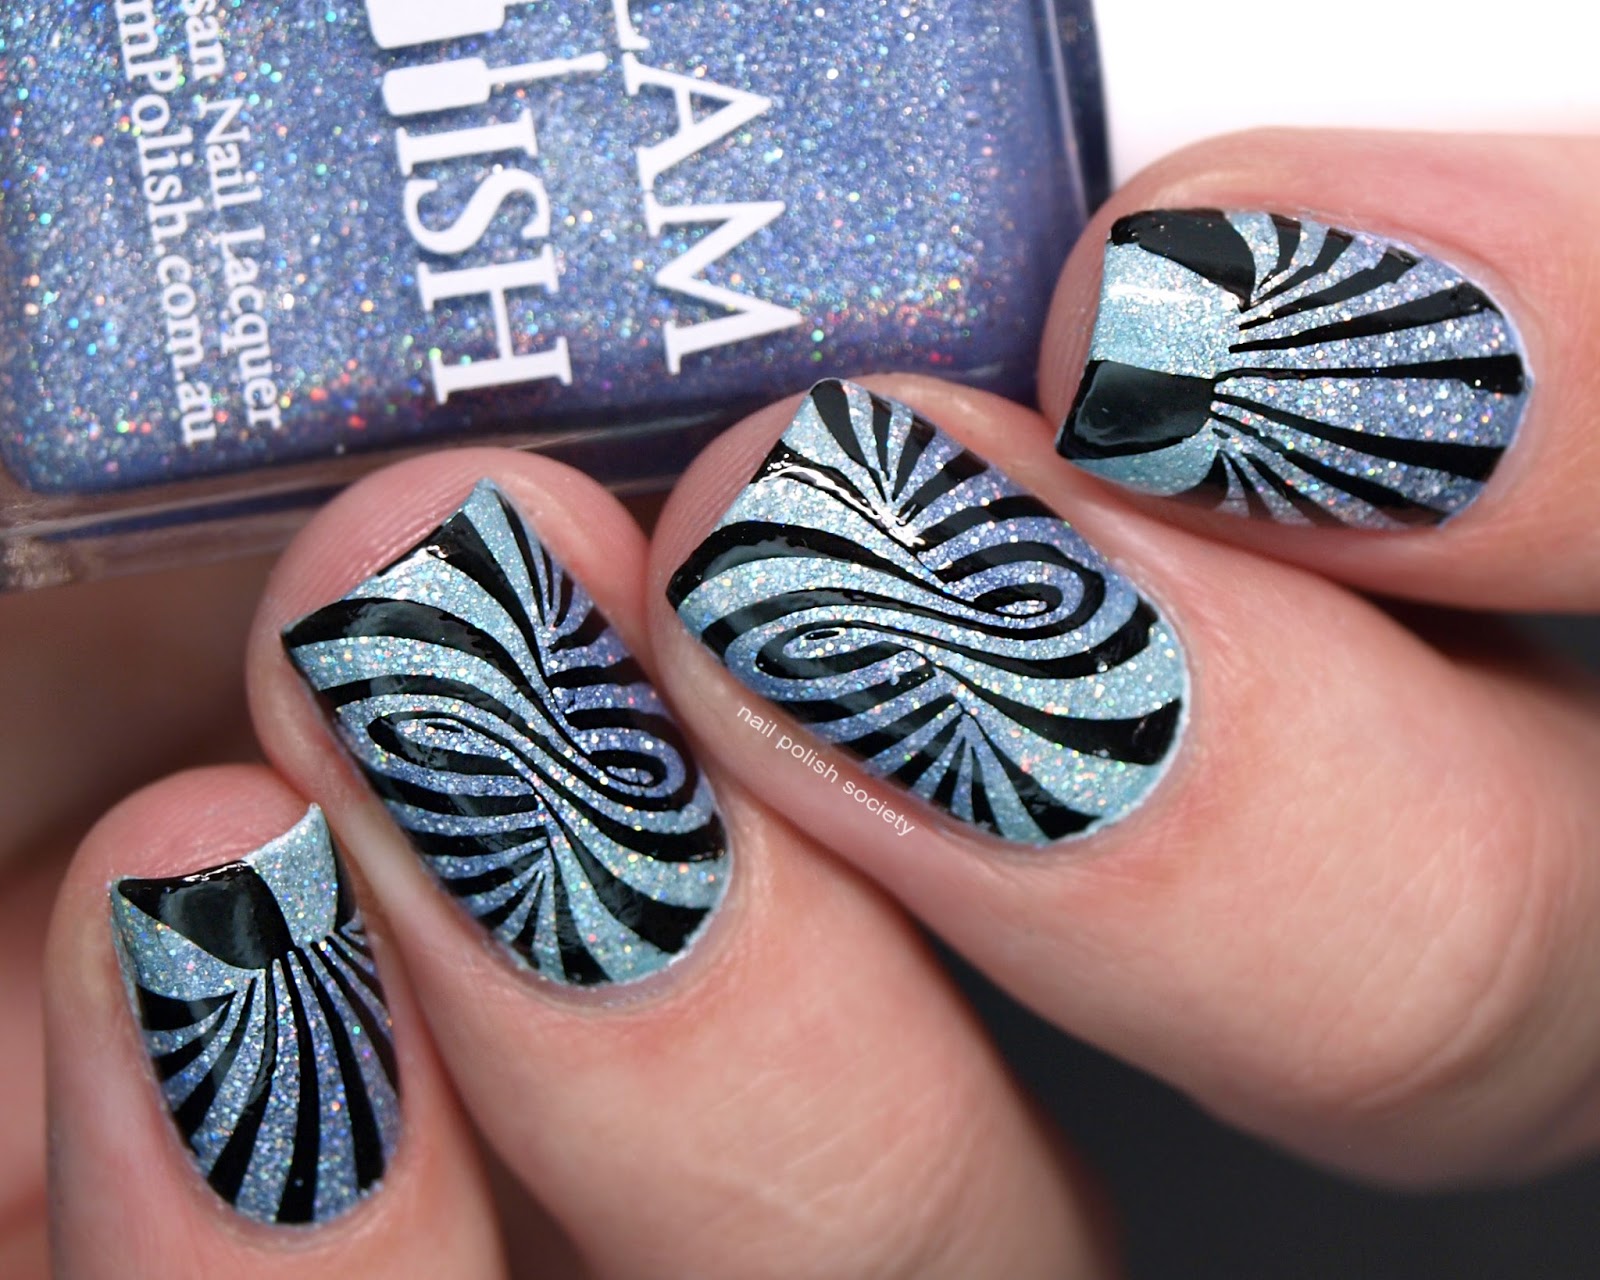 1. OPI Nail Lacquer in "Optical Illusion" - wide 8